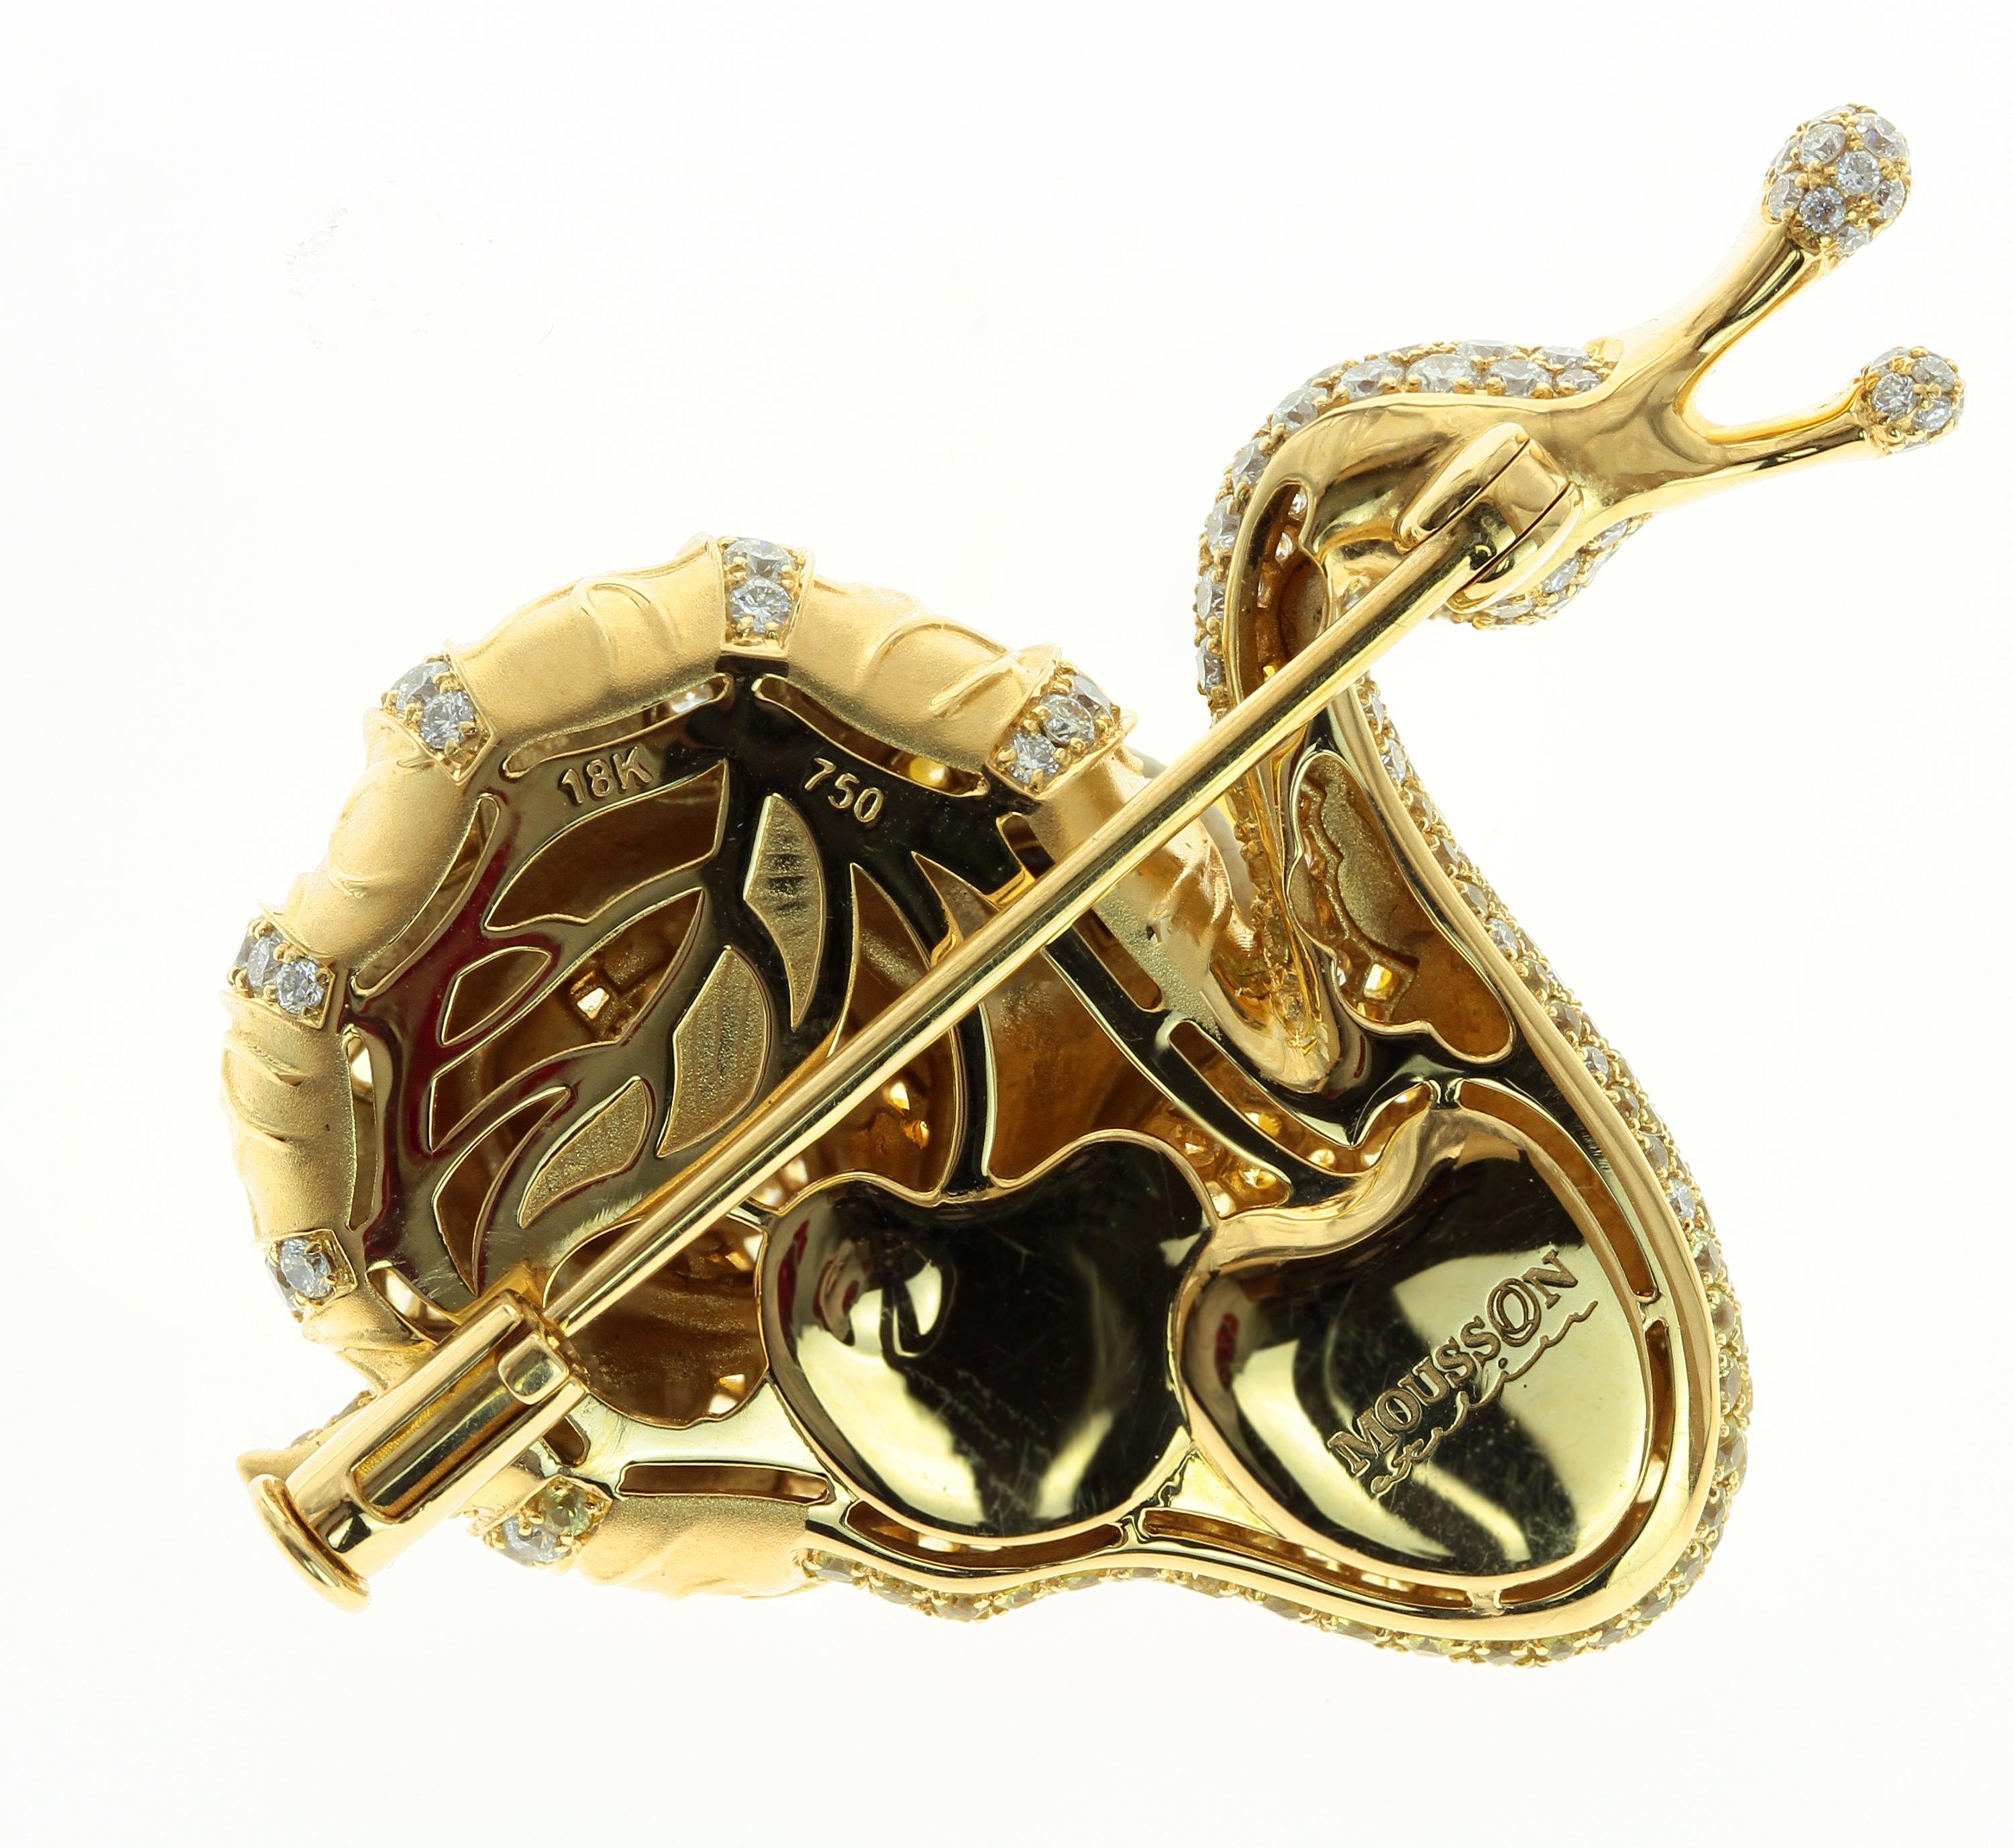 18 Karat Yellow Gold, Diamond, Yellow Sapphire Snail Brooch

Adorn yourself with this exquisite 18 Karat Yellow Gold brooch from the Eden collection. The delicate snail design radiates opulence and sophistication with sparkling diamonds and yellow